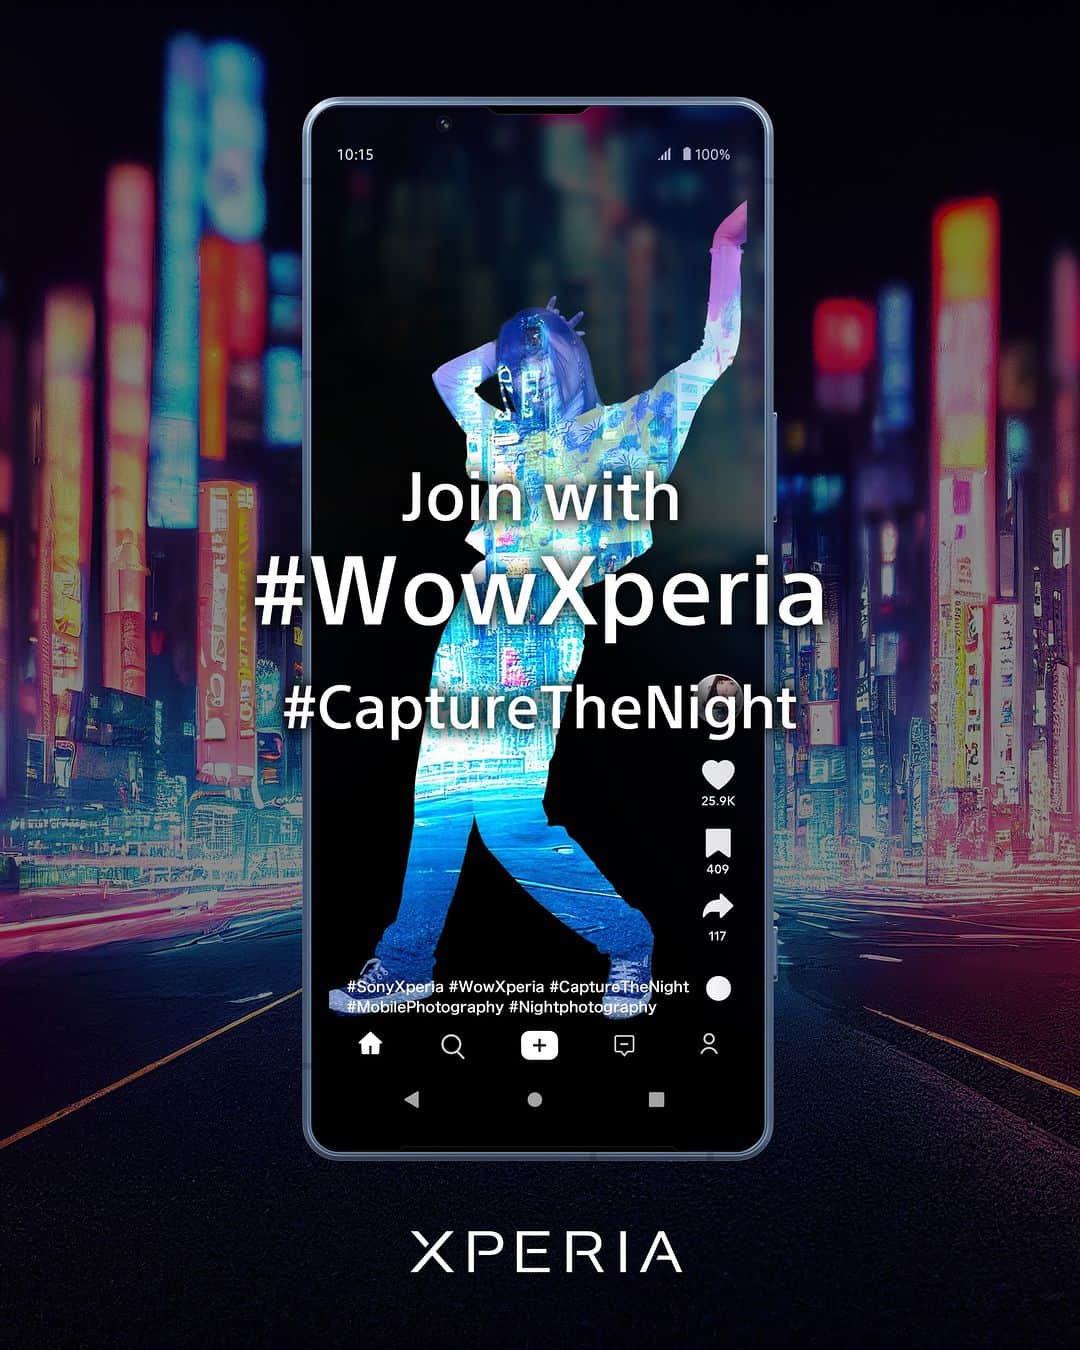 Sony Mobileのインスタグラム：「Have you already #CapturedTheNight with Xperia📱✨?​  Join our #CaptureTheNight campaign from Dec-Jan by posting on Instagram & using the #WowXperia hashtag for the chance to be featured on our Instagram channel 🌃📷! ​  Follow our channel and capture the nighttime world with Xperia – and don't forget to post them with #WowXperia! ​  For your image to be eligible for reposting, you must ensure the following: ​  ​ ✓You tag #WowXperia, the name of your country or region (e.g. #Japan), and the name of your Xperia device (e.g. #Xperia5V) ​ ✓You capture with an Xperia device ​ ✓You follow @SonyXperia on Instagram ​ ✓You read and accept our Terms & Conditions ​  ​ If we choose to feature your photo or movie, we will contact you first via Instagram Direct. ​ ​ #Sony #Xperia #SonyXperia #WowXperia #CaptureTheNight」